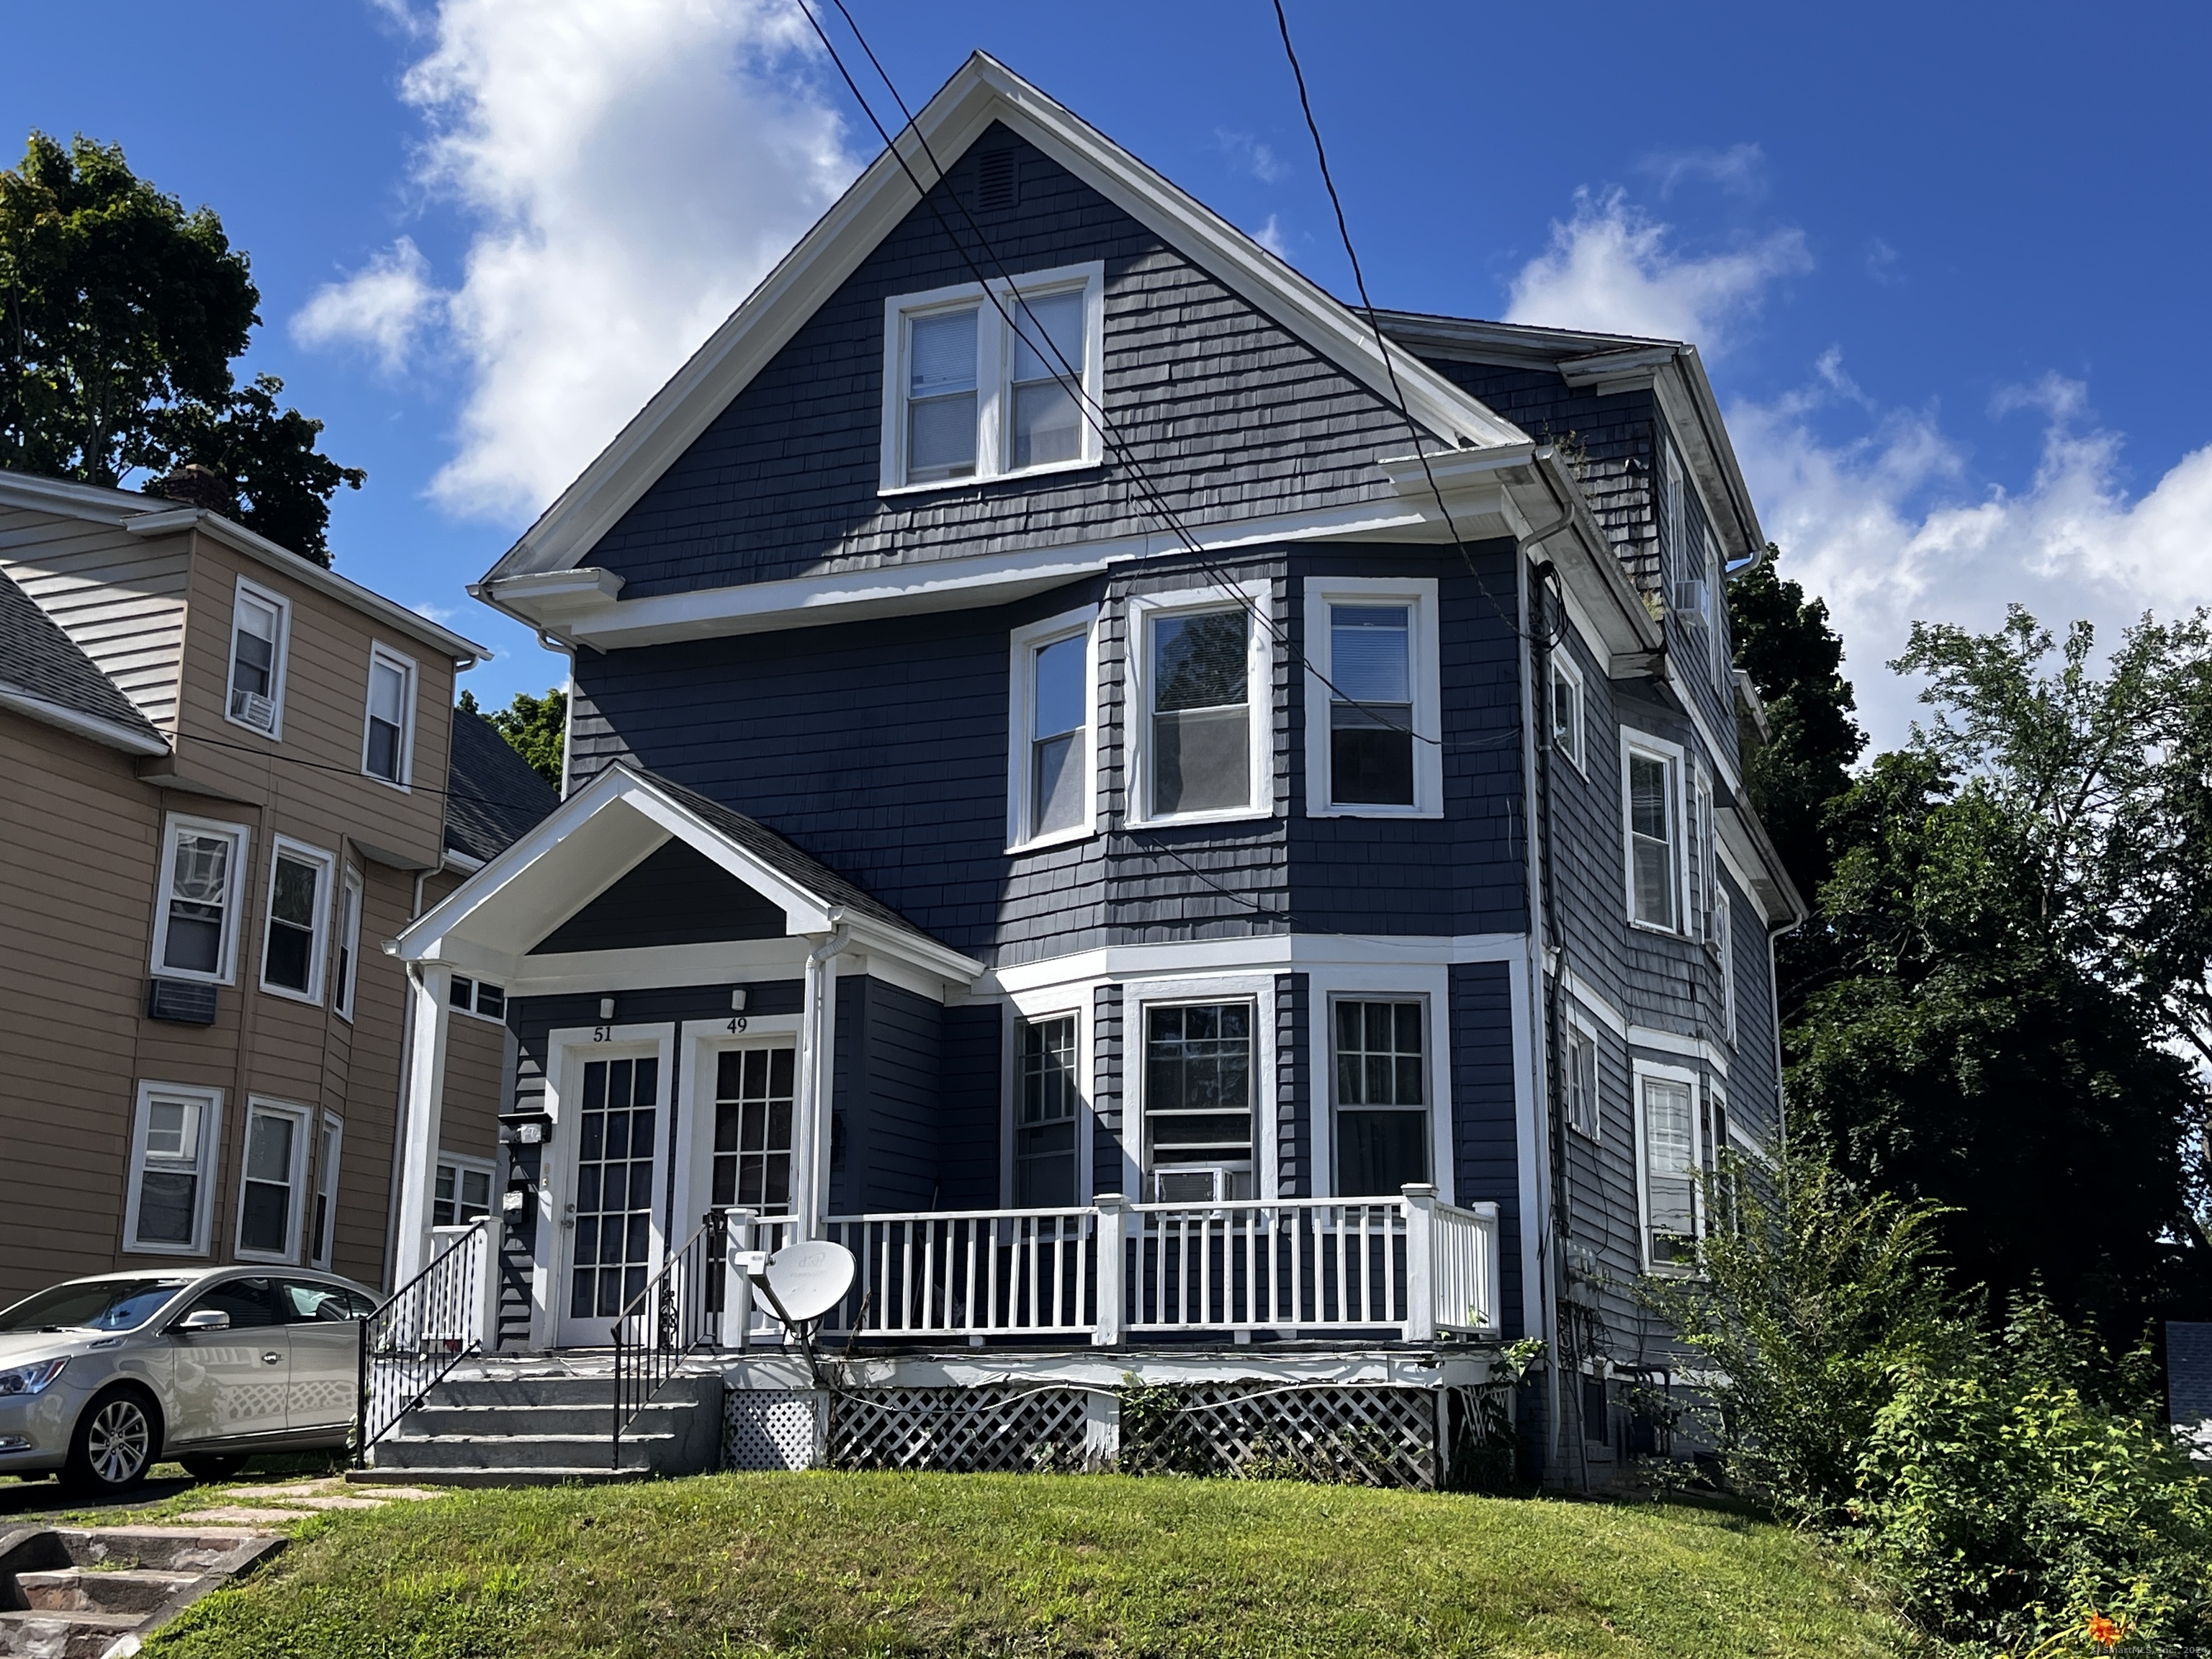 Rental Property at 49 Fairfield Street, New Haven, Connecticut - Bedrooms: 2 
Bathrooms: 1 
Rooms: 4  - $1,400 MO.